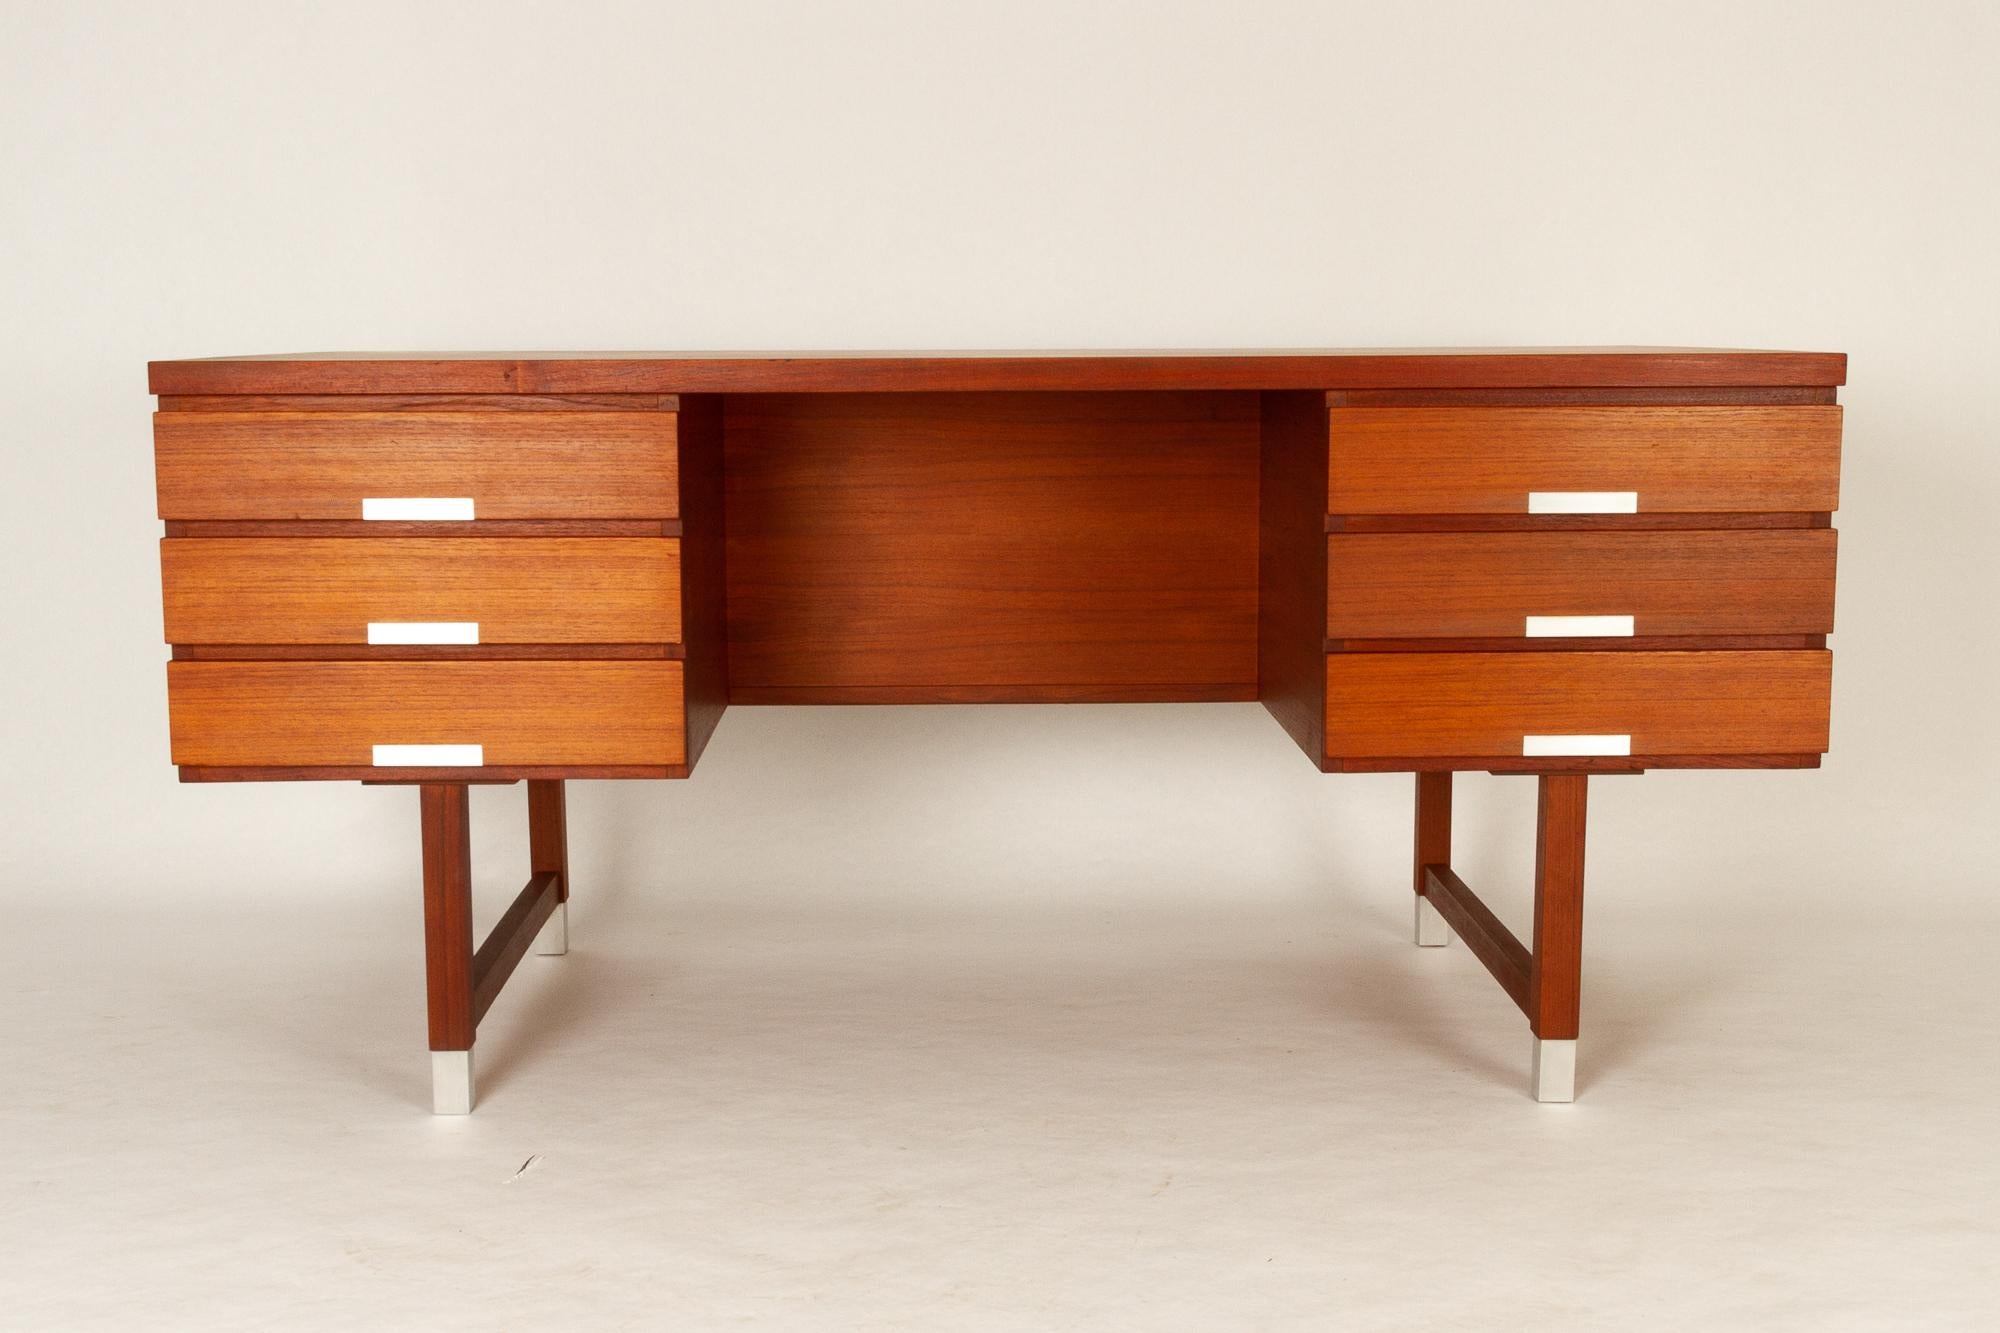 Vintage Danish teak desk, 1960s
Large freestanding Mid-Century Modern Danish writing desk in teak. With the cubist shape and stringent lines, this is a good example of the minimalistic design pursued by the Danish architects in the golden era of